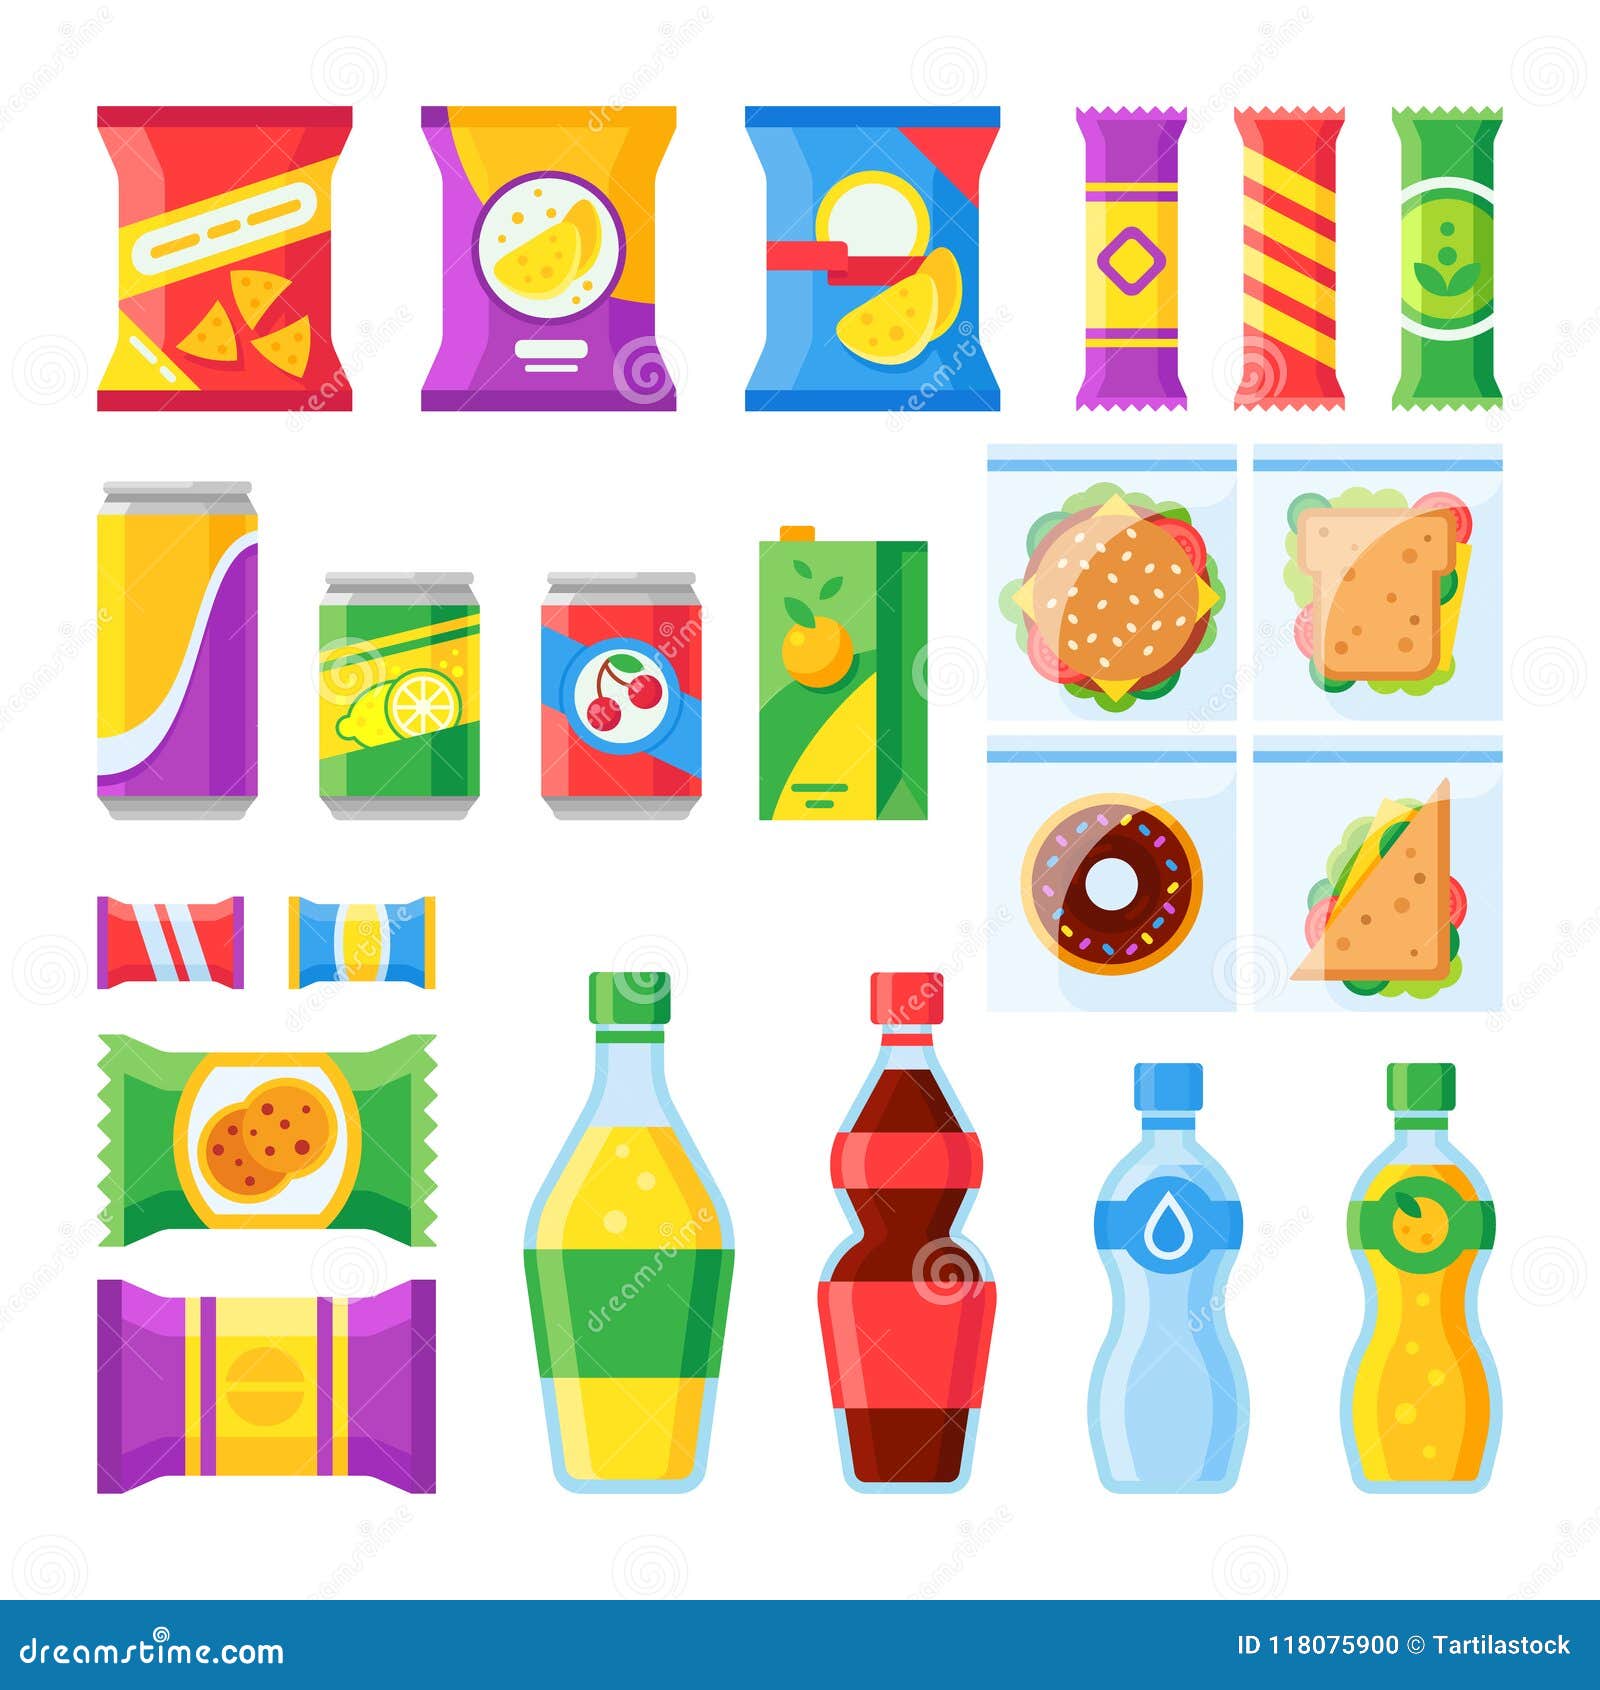 vending products. snacks, chips, sandwich and drinks for vendor machine bar. cold beverages and snack in plastic package